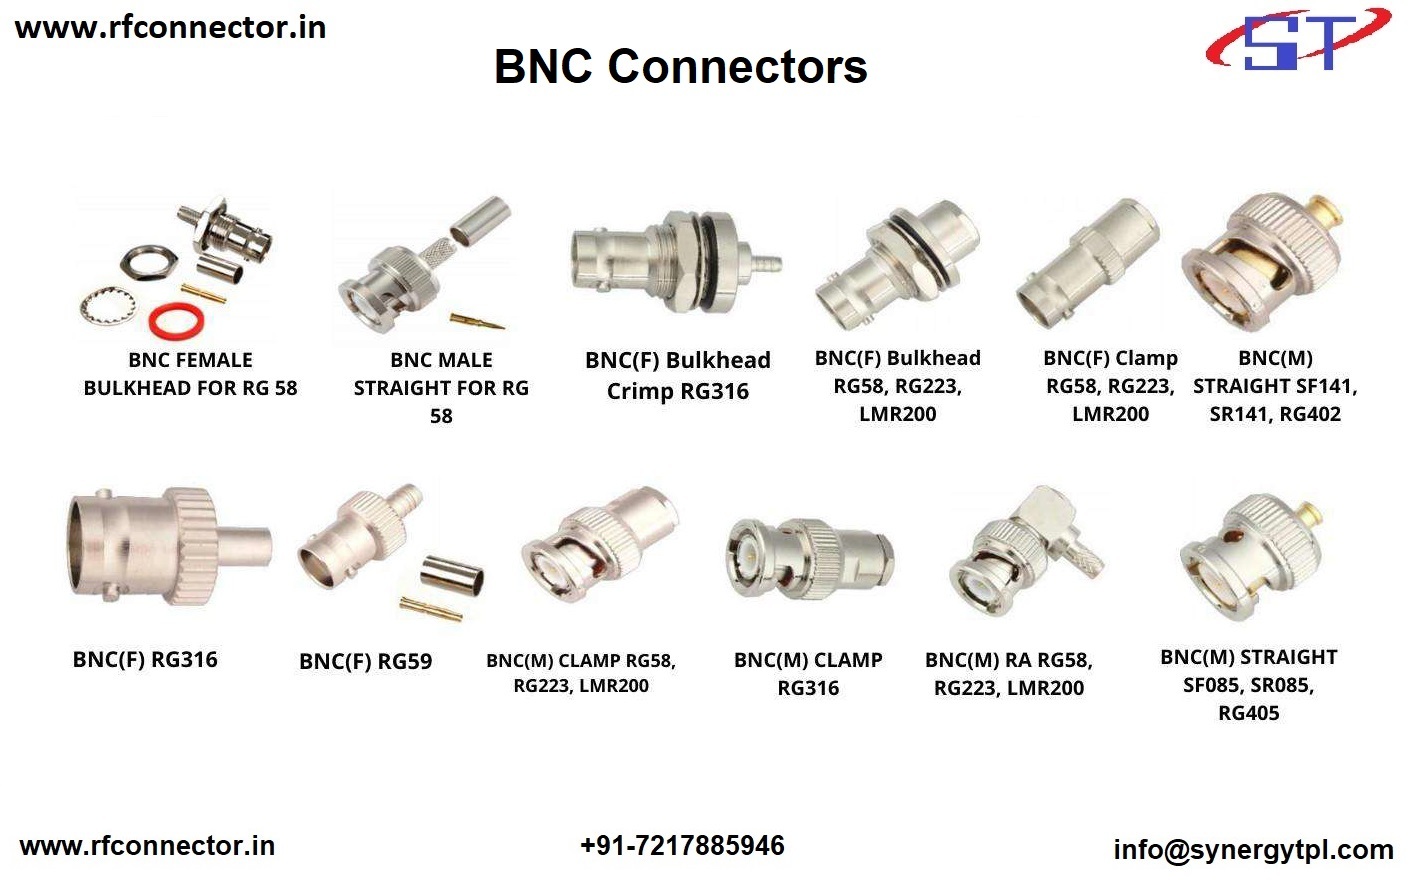 DIN male crimp connector for LMR 400 cable